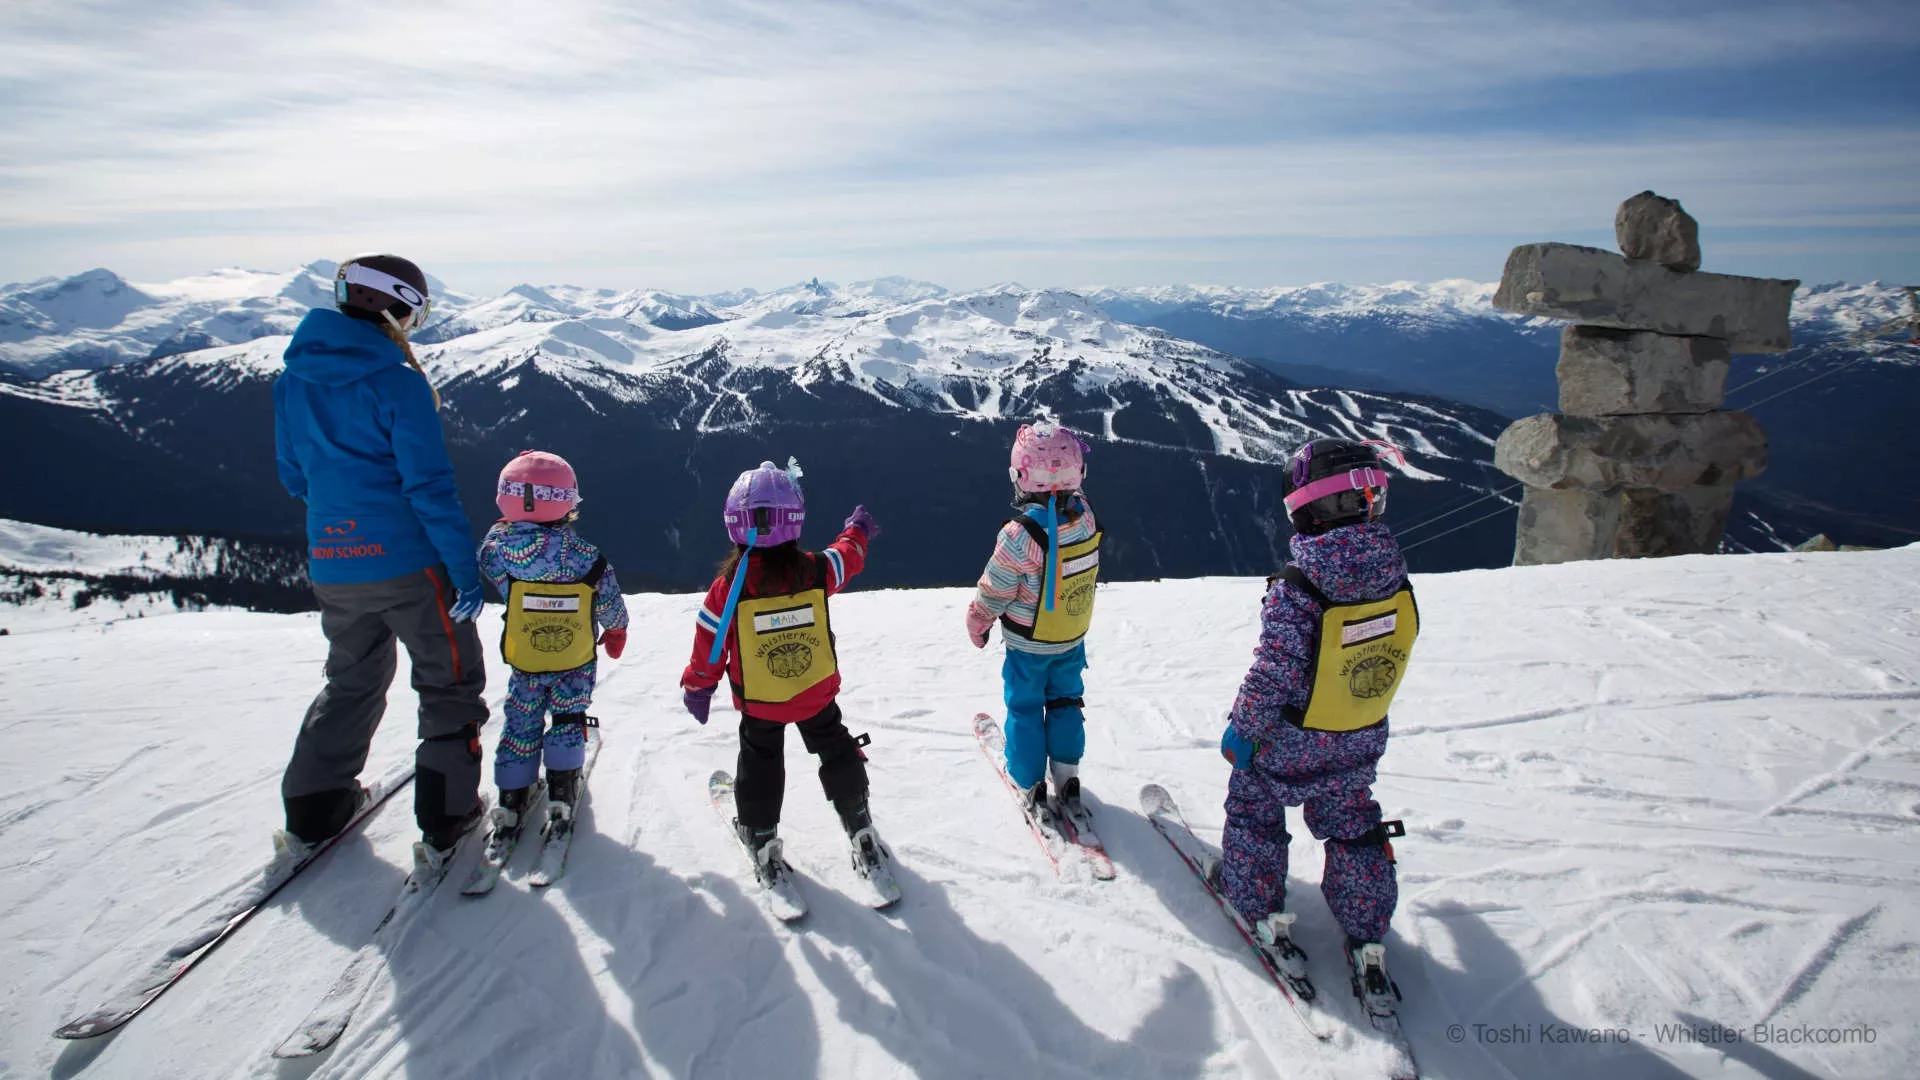 Whistler Blackcomb Snow School in Canada, North America | Snowboarding,Skiing - Rated 3.8